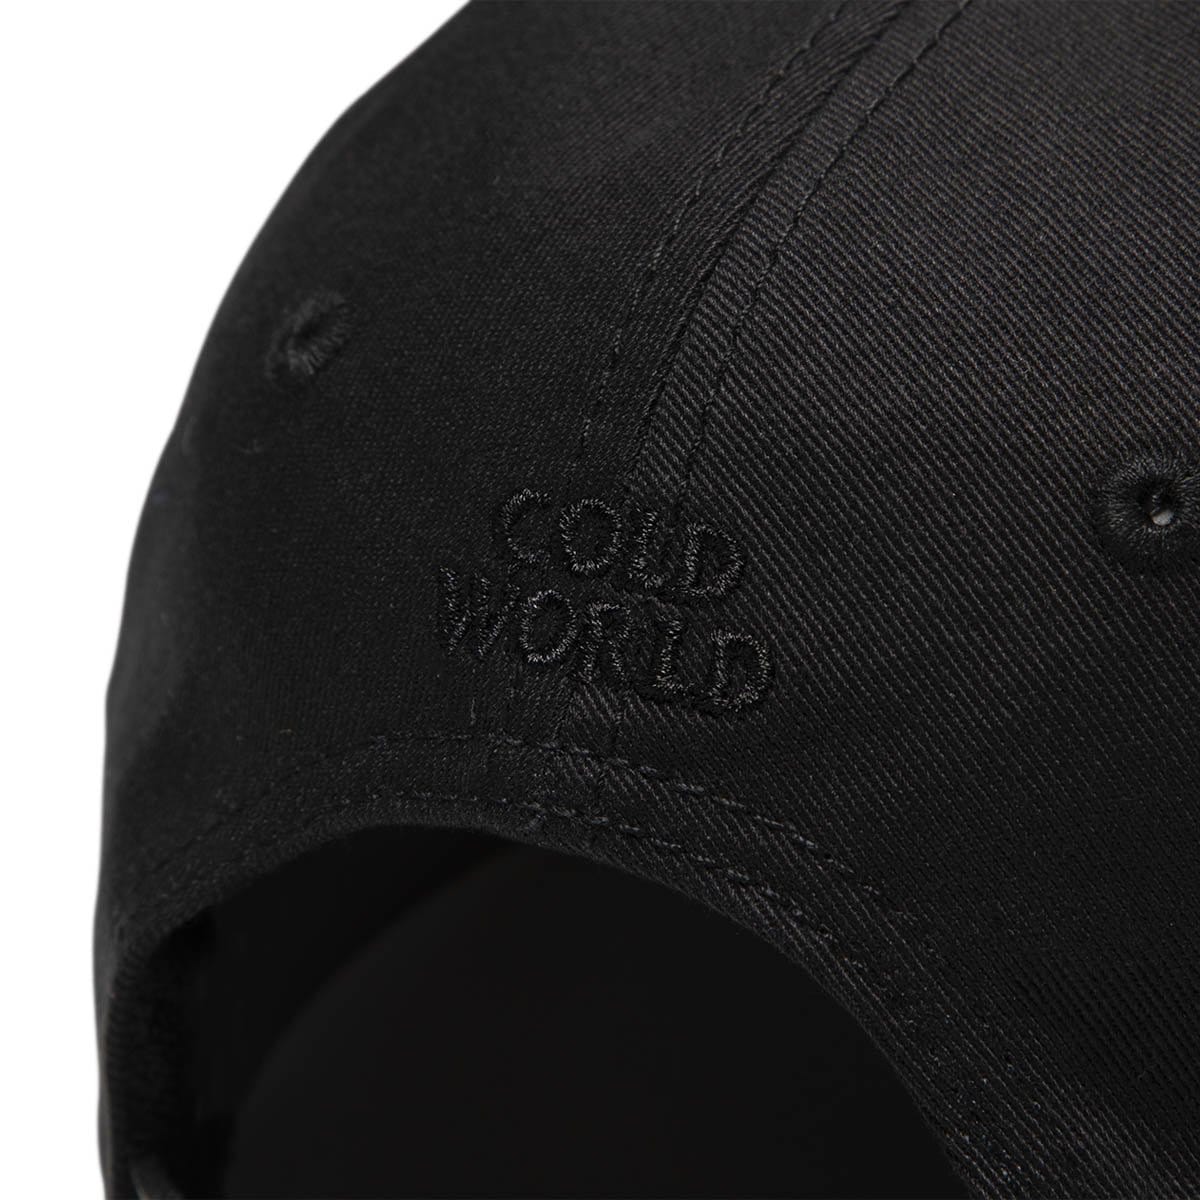 Cold World Frozen Goods Headwear BLACK / O/S PANTHER UNSTRUCTURED 6 PANEL